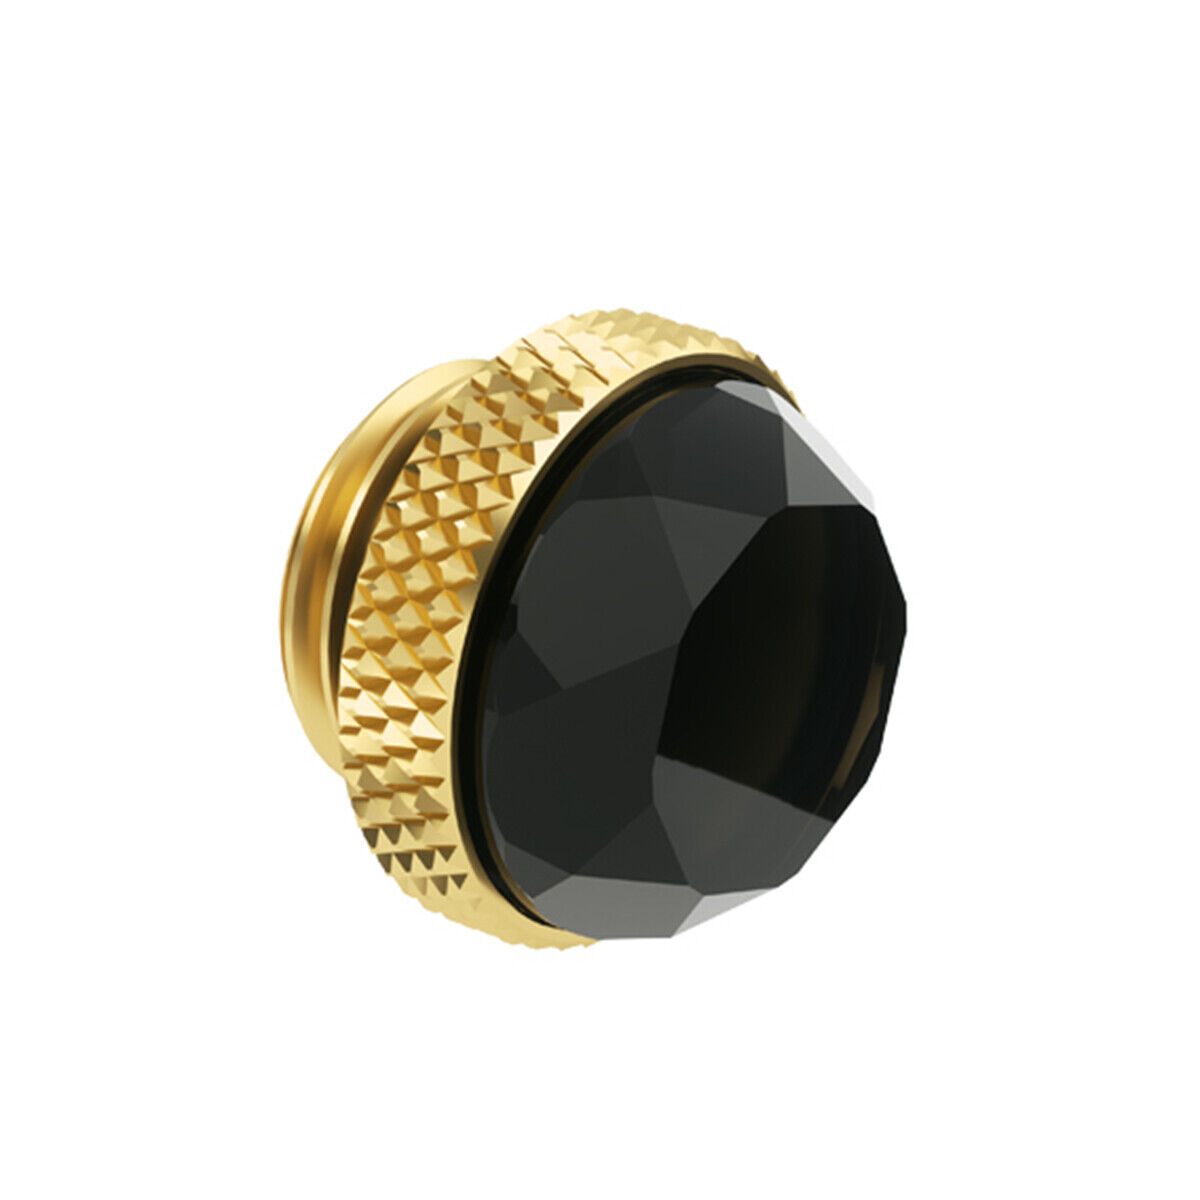 Barrow Stop Plug Fitting - Special Be super welcome price for a limited time Gem Black Gold Series Classic Body